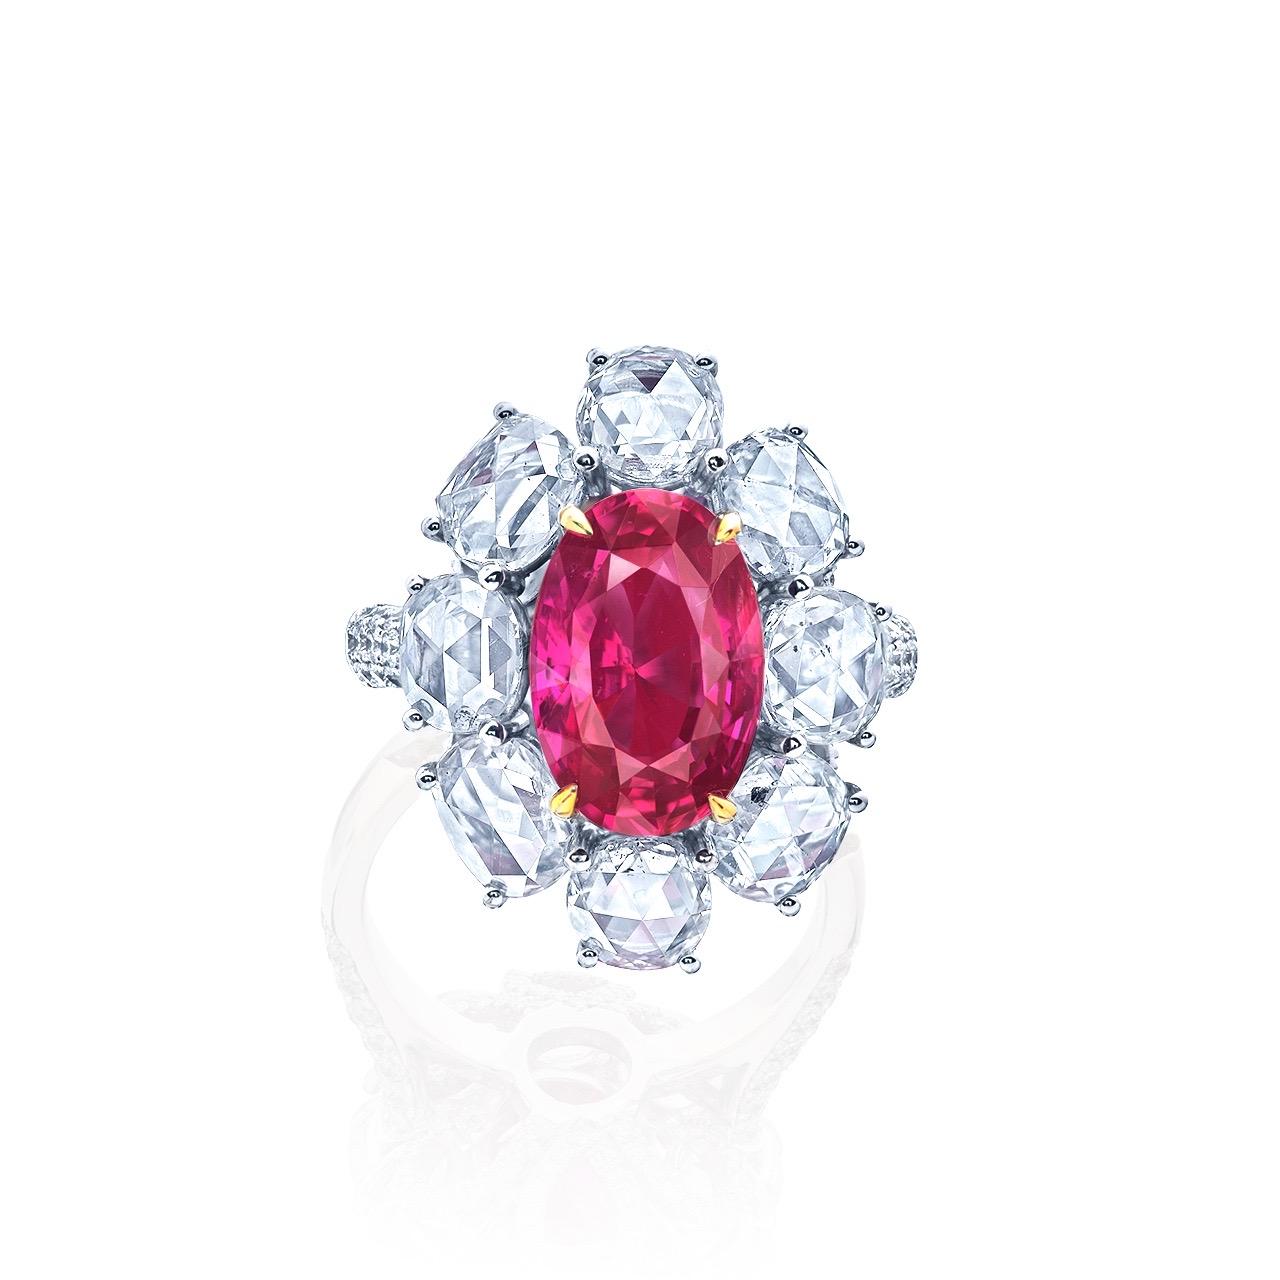 From Emilio Jewelry New York, a well known and respected dealer wholesaler located on New York's iconic Fifth Avenue. 
Certified Center stone just over 4.65ct Mozambique No Heat pigeon blood high quality Ruby. The Ruby is high in luster and